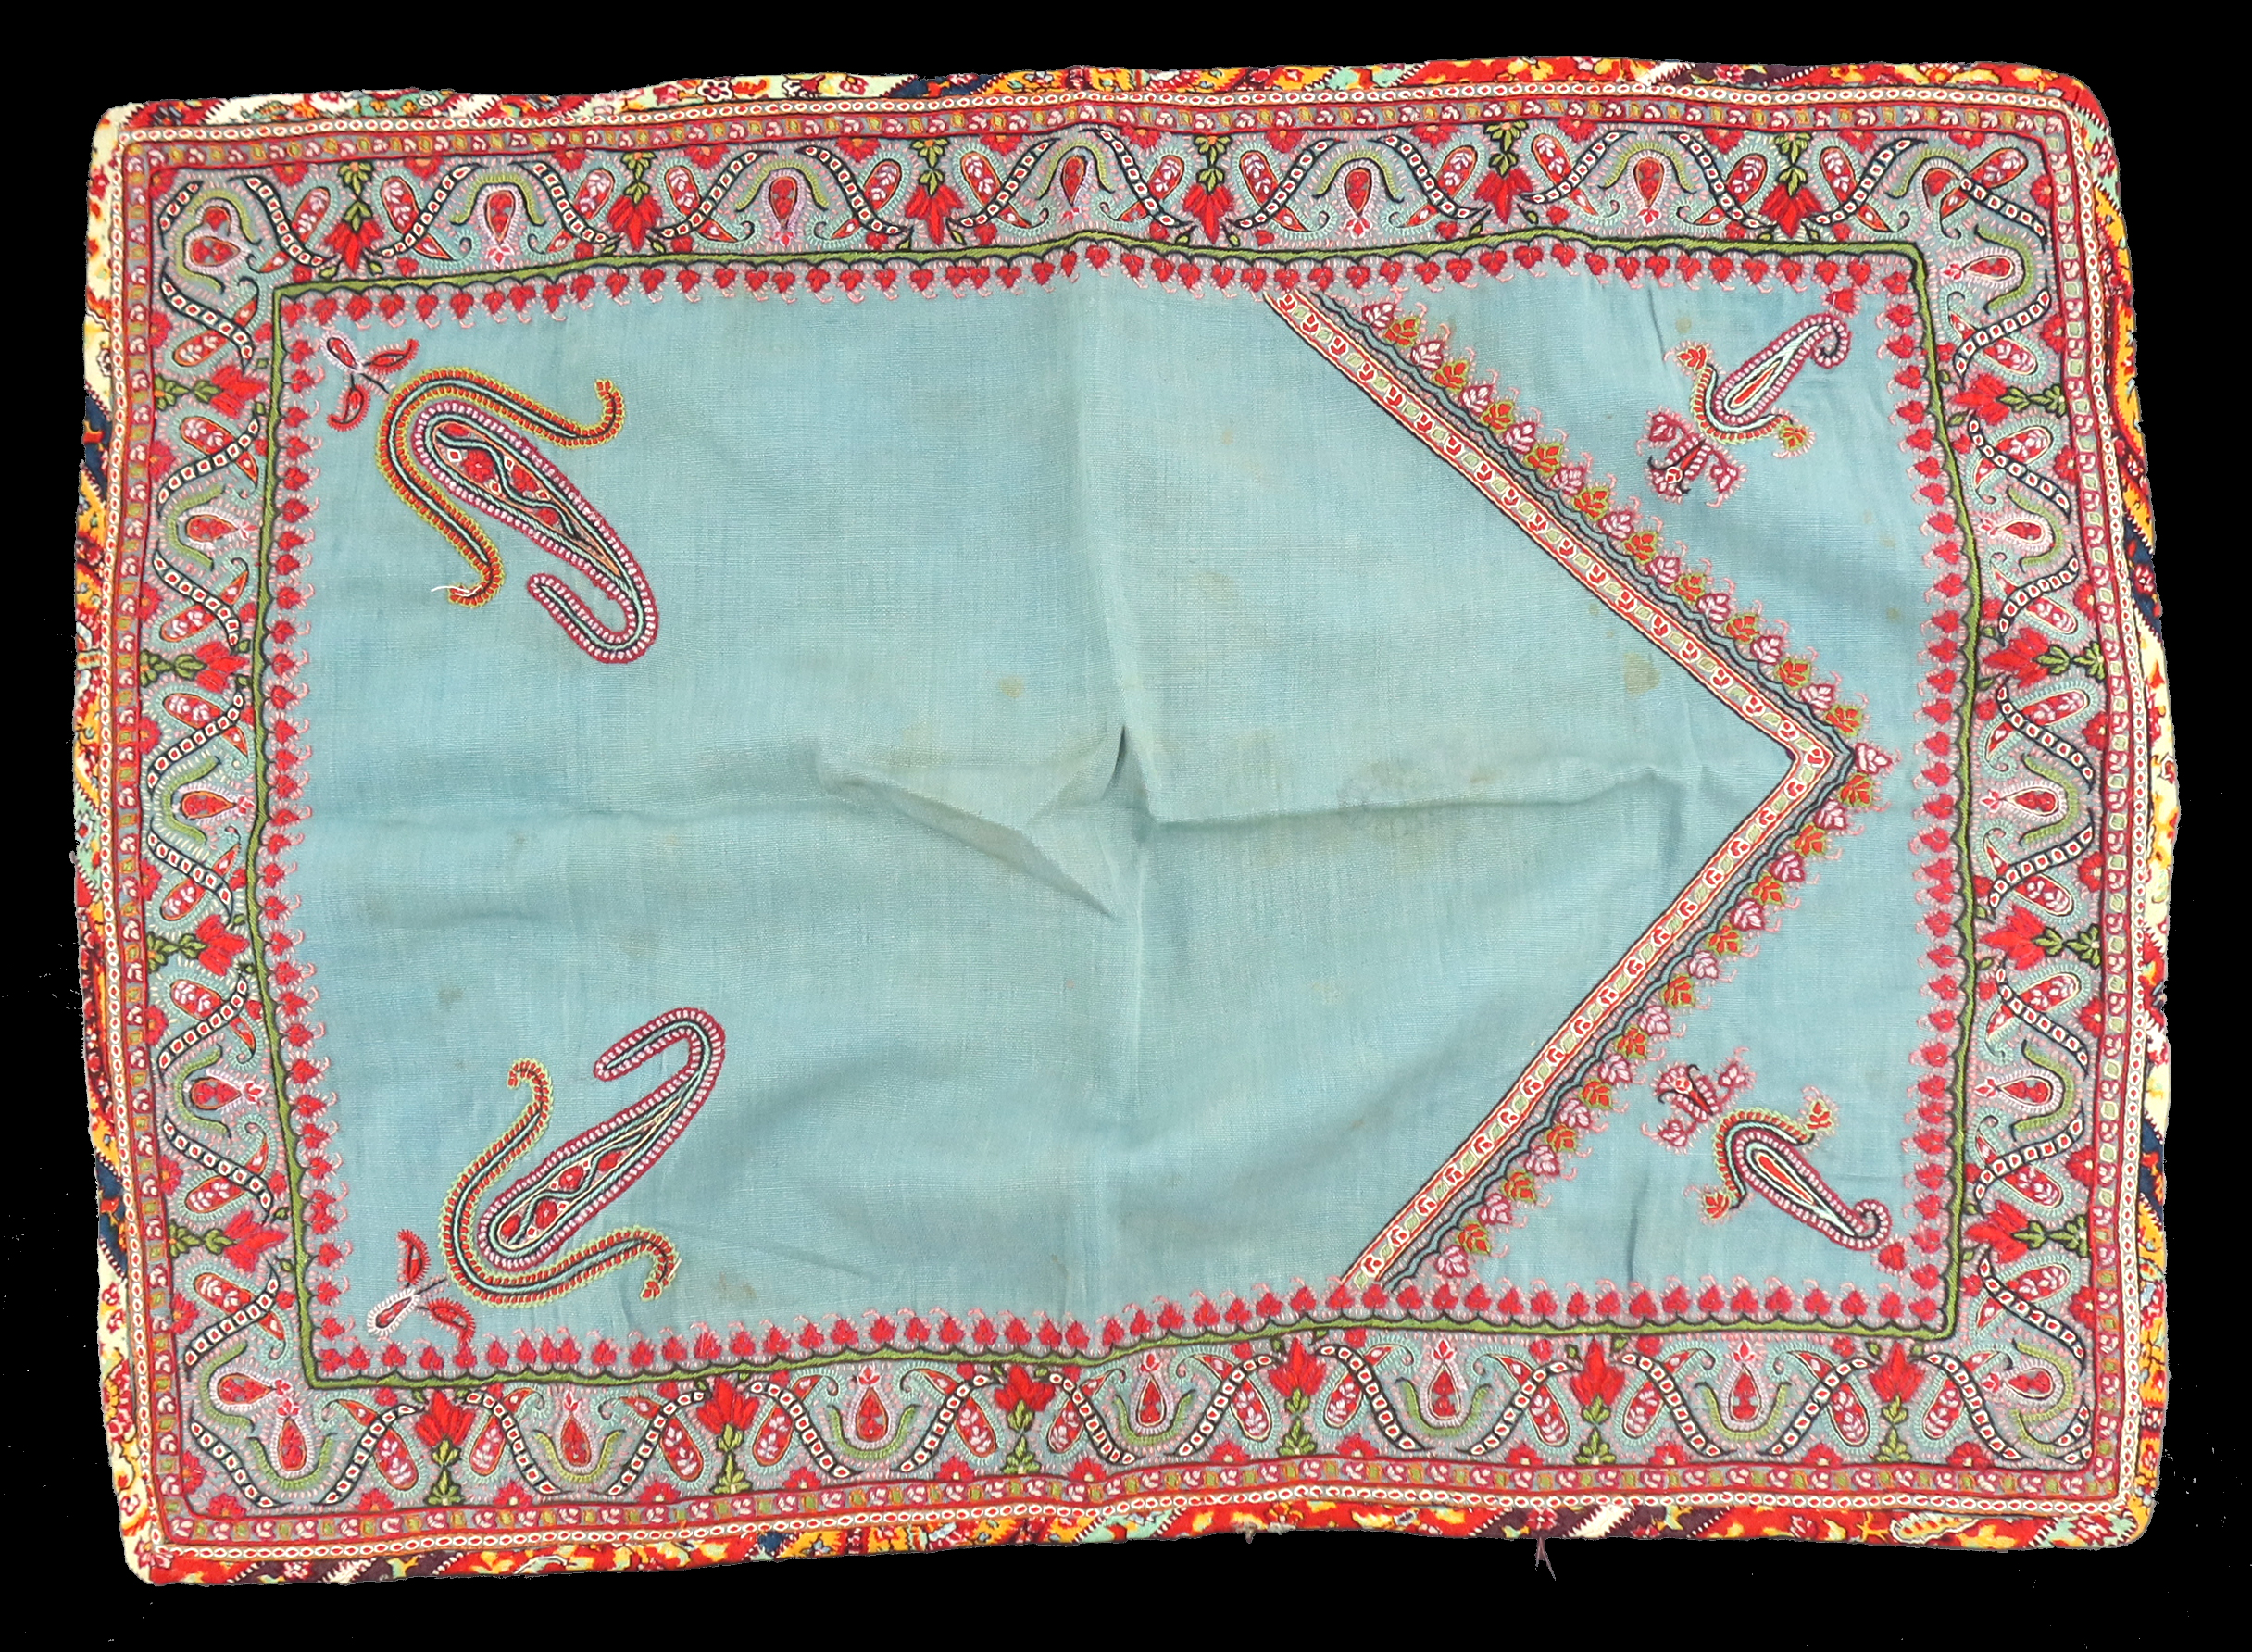 A finely embroidered rectangular cover, probably Persian, early 19th century, worked on a light turq